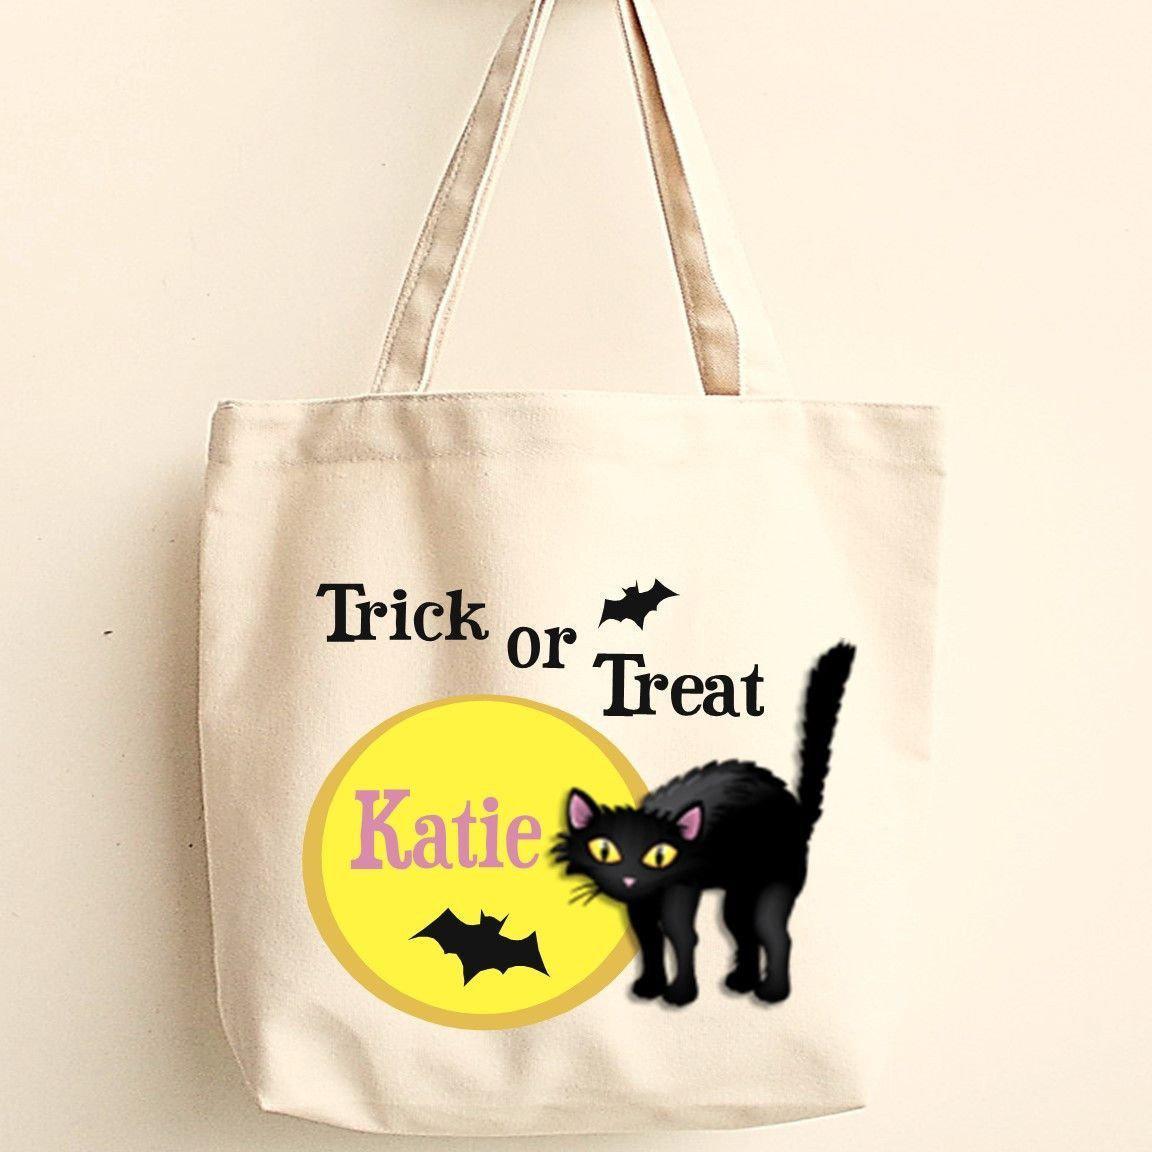 Personalized Trick or Treat Bags - Halloween Treat Bags - Gifts for Kids